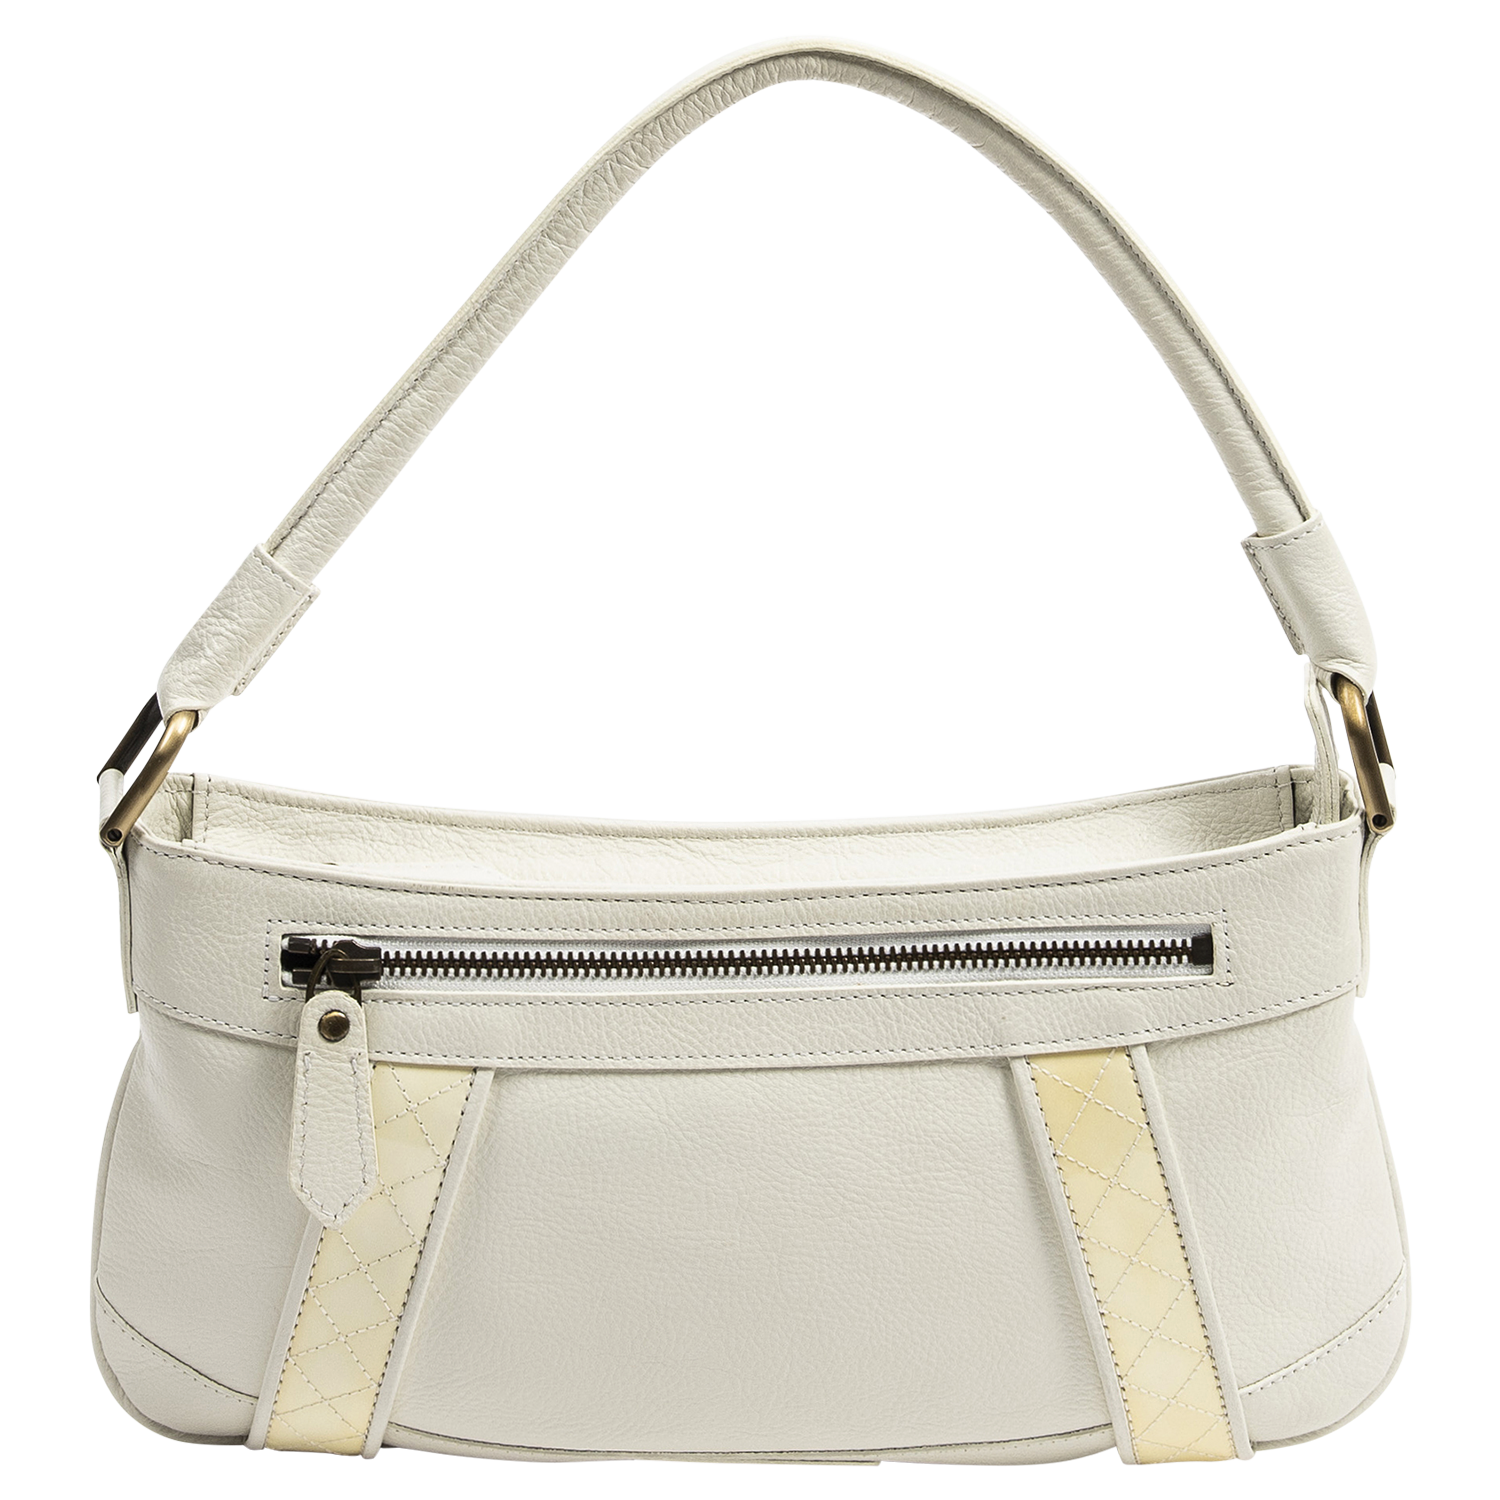 Burberry White Grained Leather Shoulder Bag